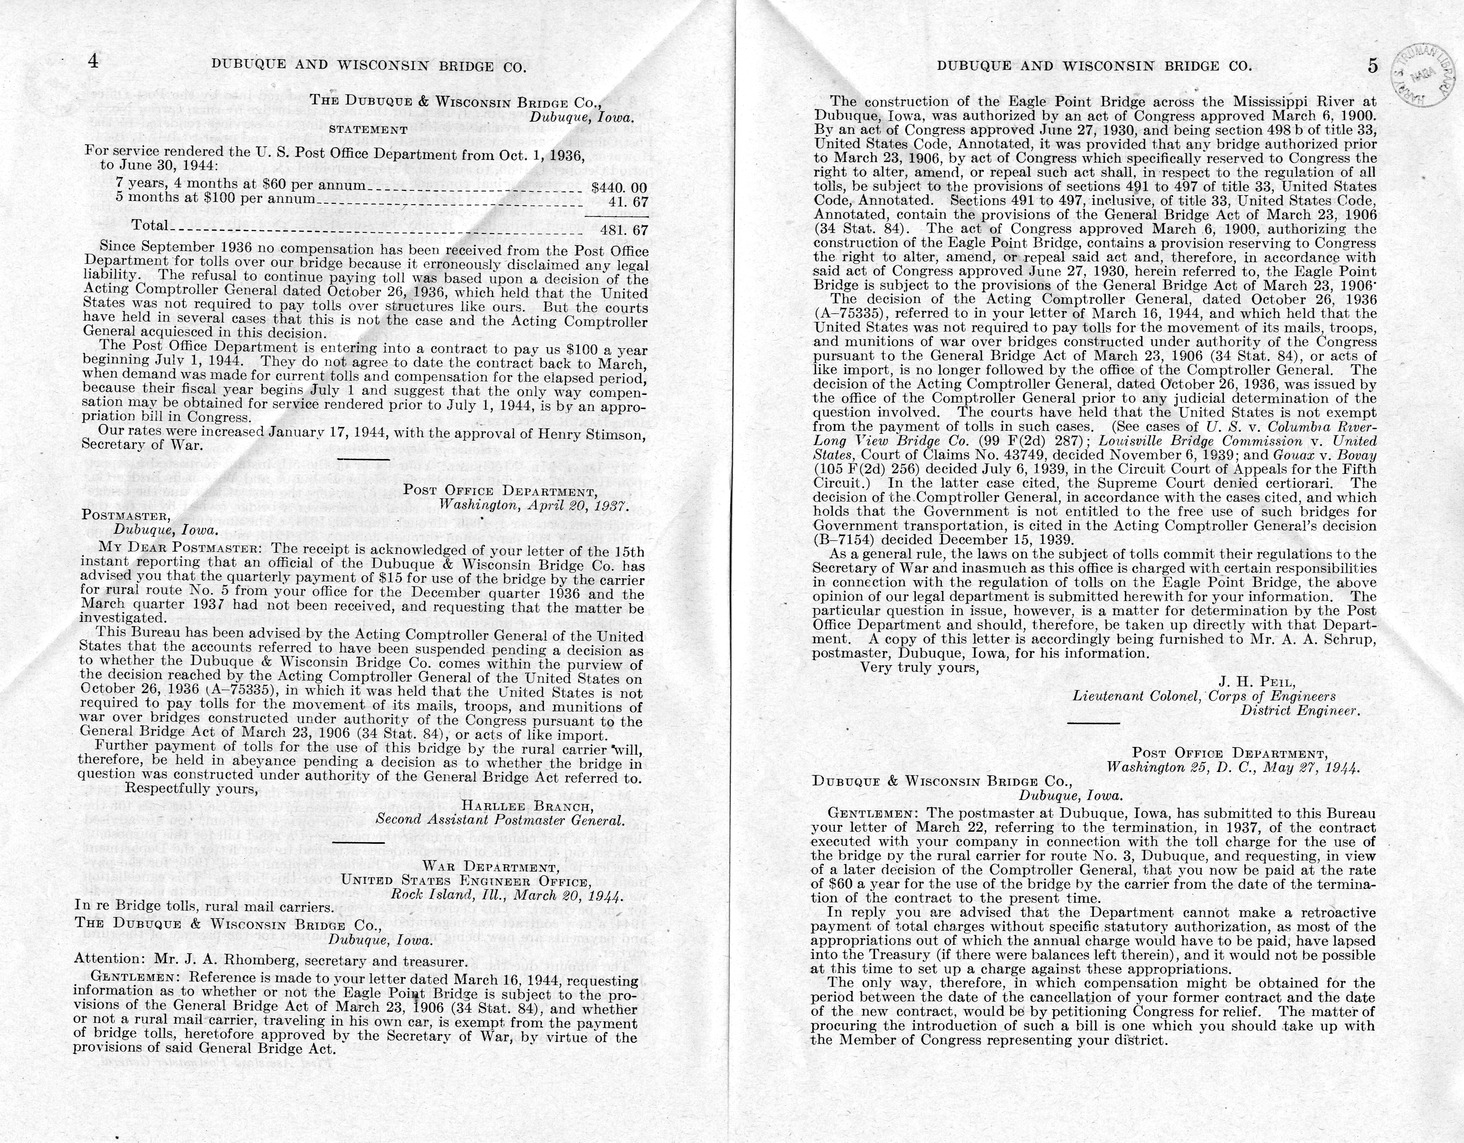 Memorandum from Frederick J. Bailey to M. C. Latta, H.R. 2748, For the Relief of the Dubuque and Wisconsin Bridge Company, with Attachments